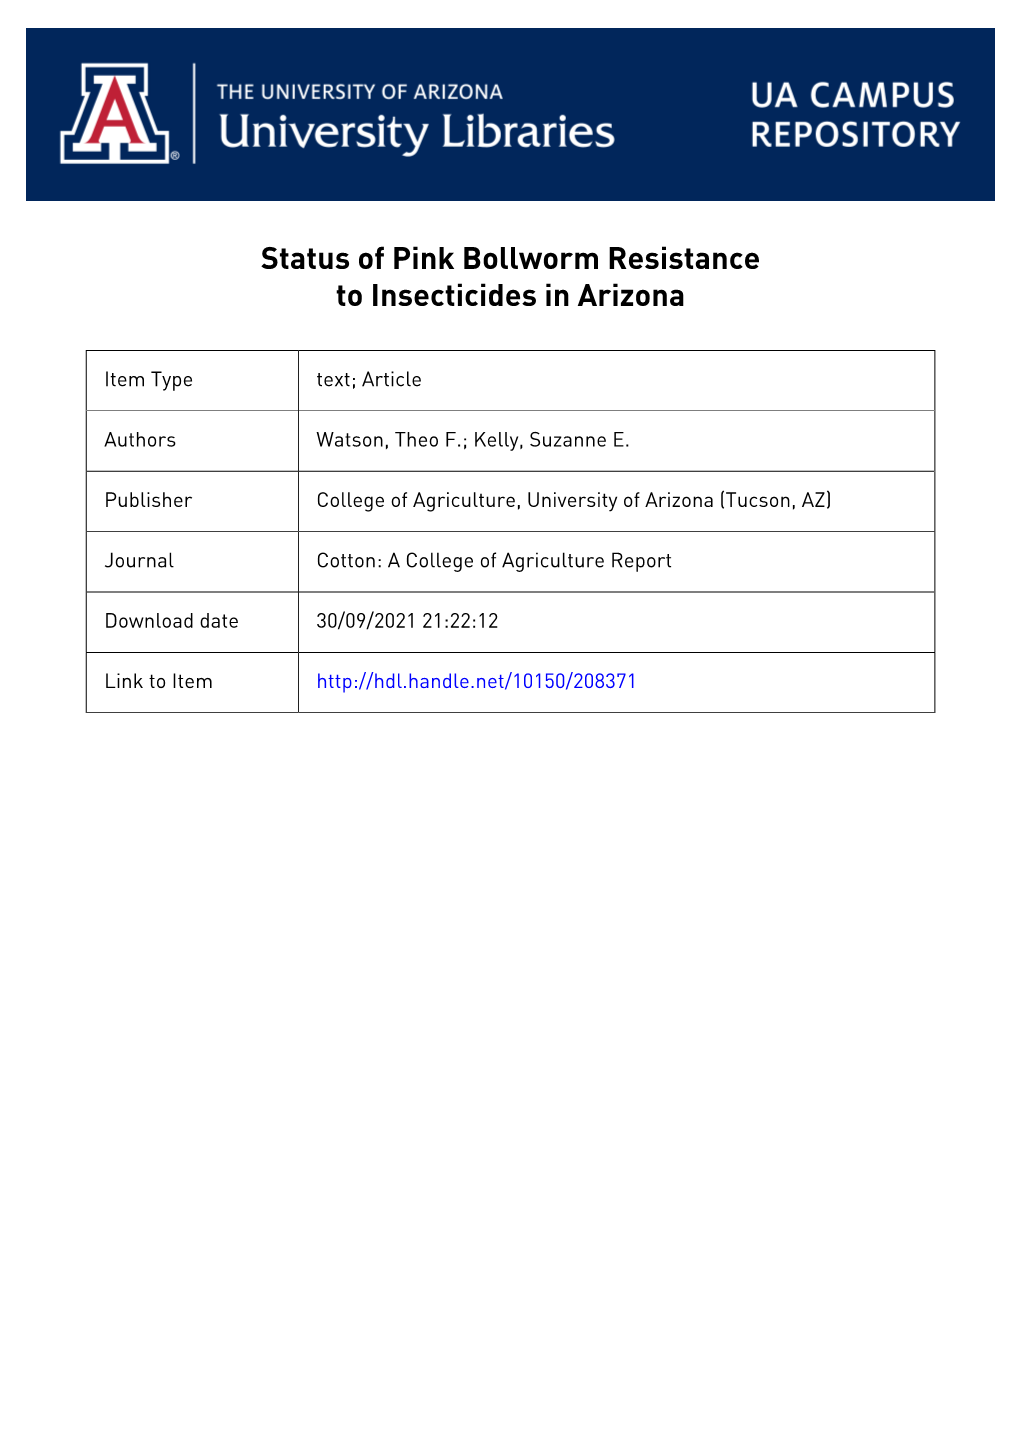 Status of Pink Bollworm Resistance to Insecticides in Arizona